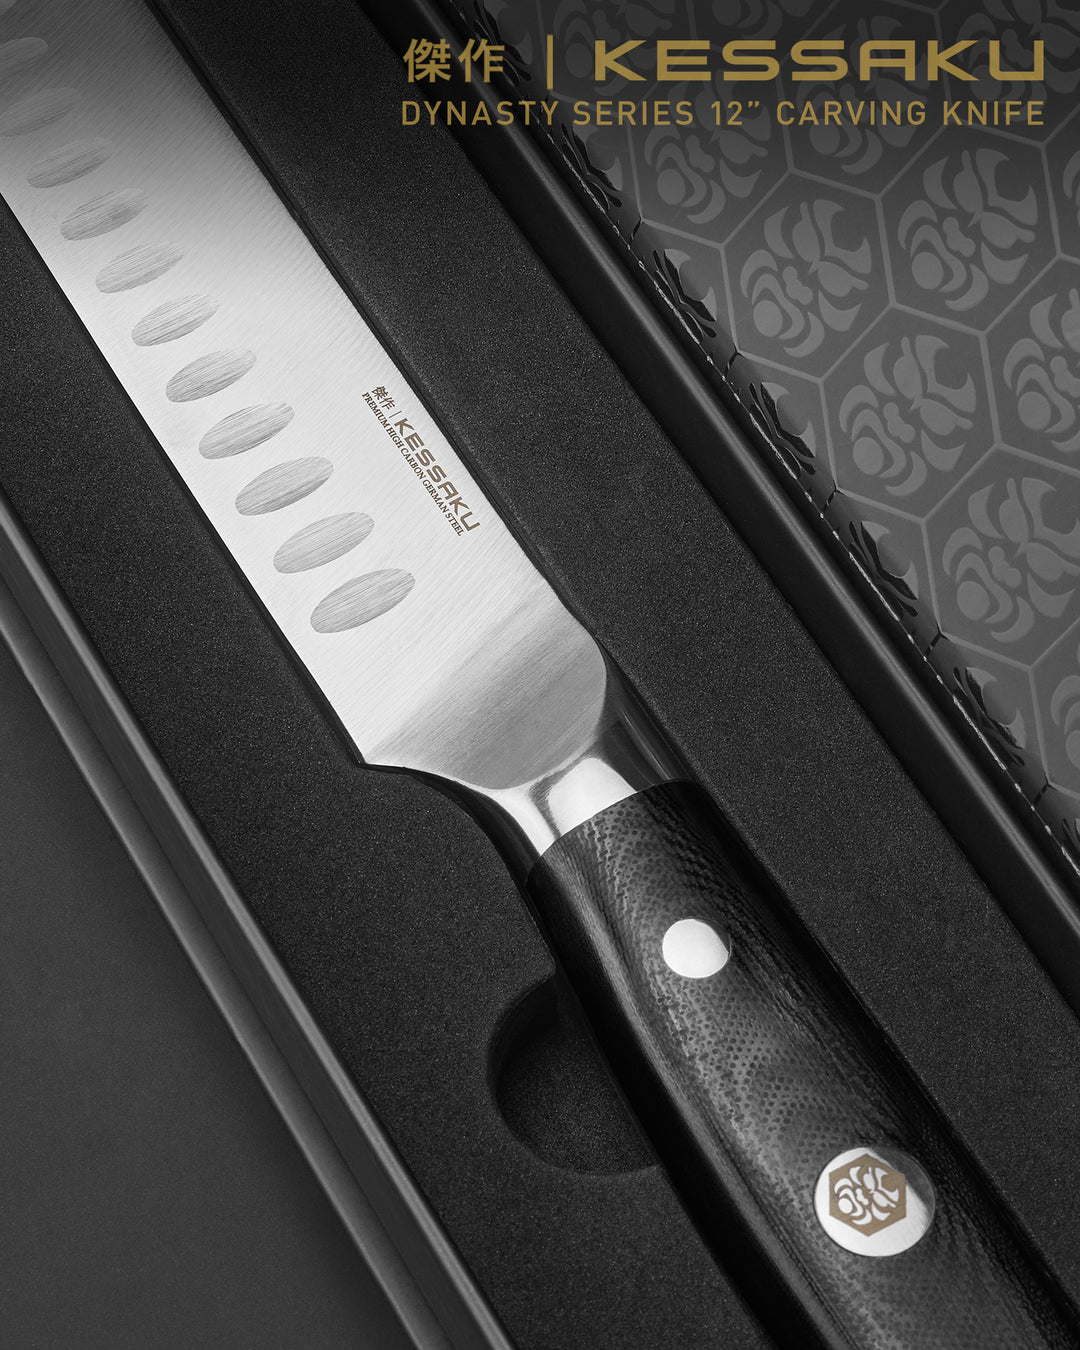 The Dynasty Carving Knife in its premium gift box.